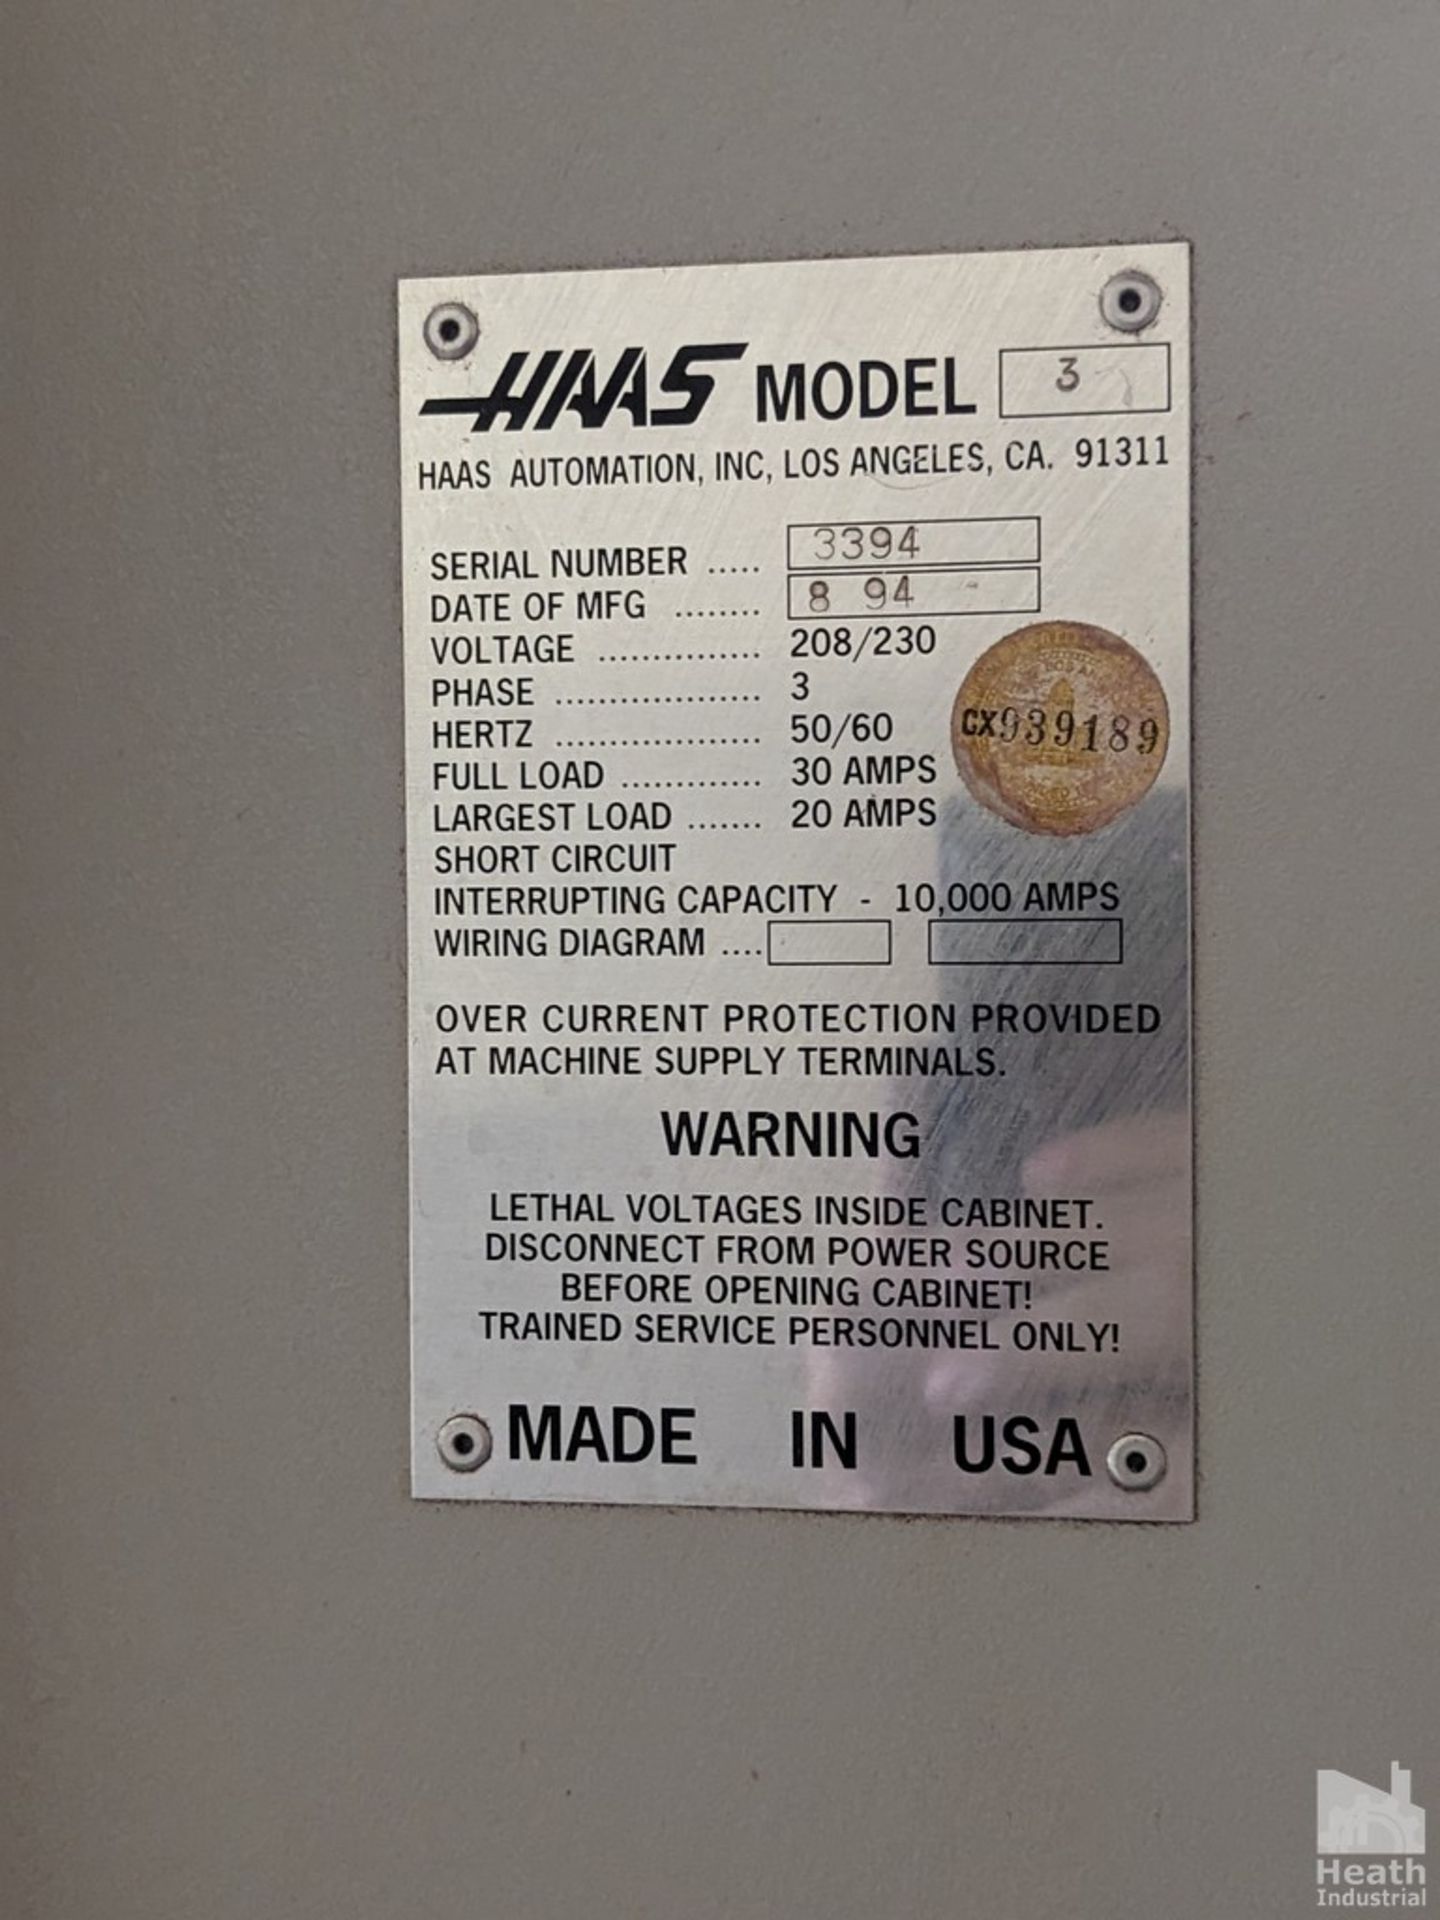 HAAS 3-AXIS MODEL VF-3 CNC VERTICAL MACHINING CENTER - Image 7 of 7